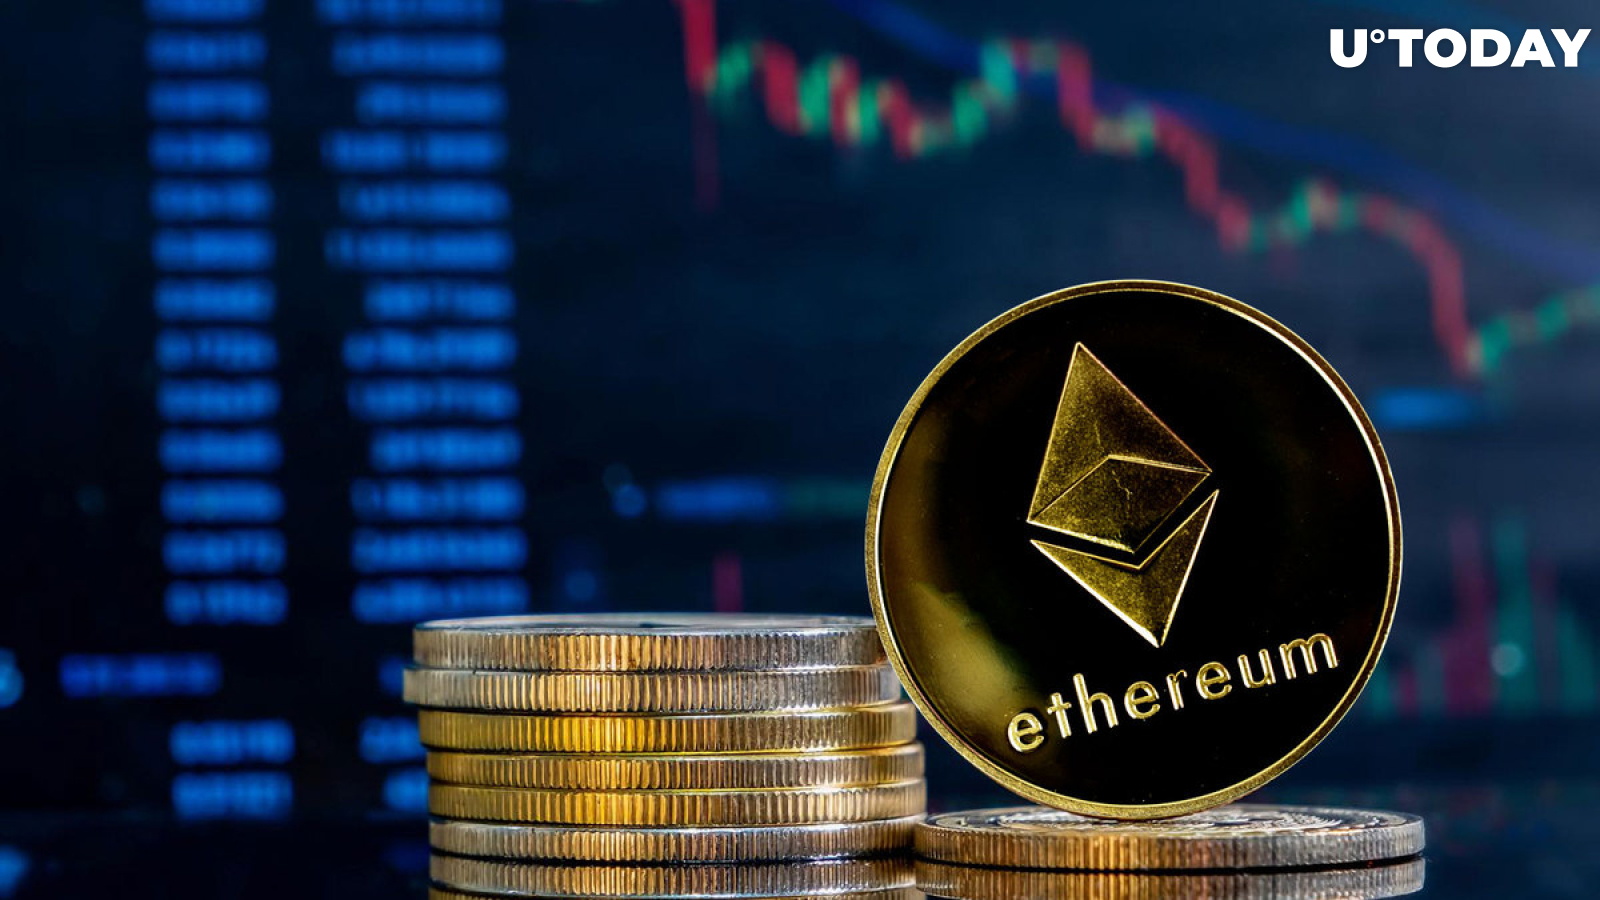 Ethereum (ETH) Price Eyes 2019 Scenario Repeat: Here's What's Going On